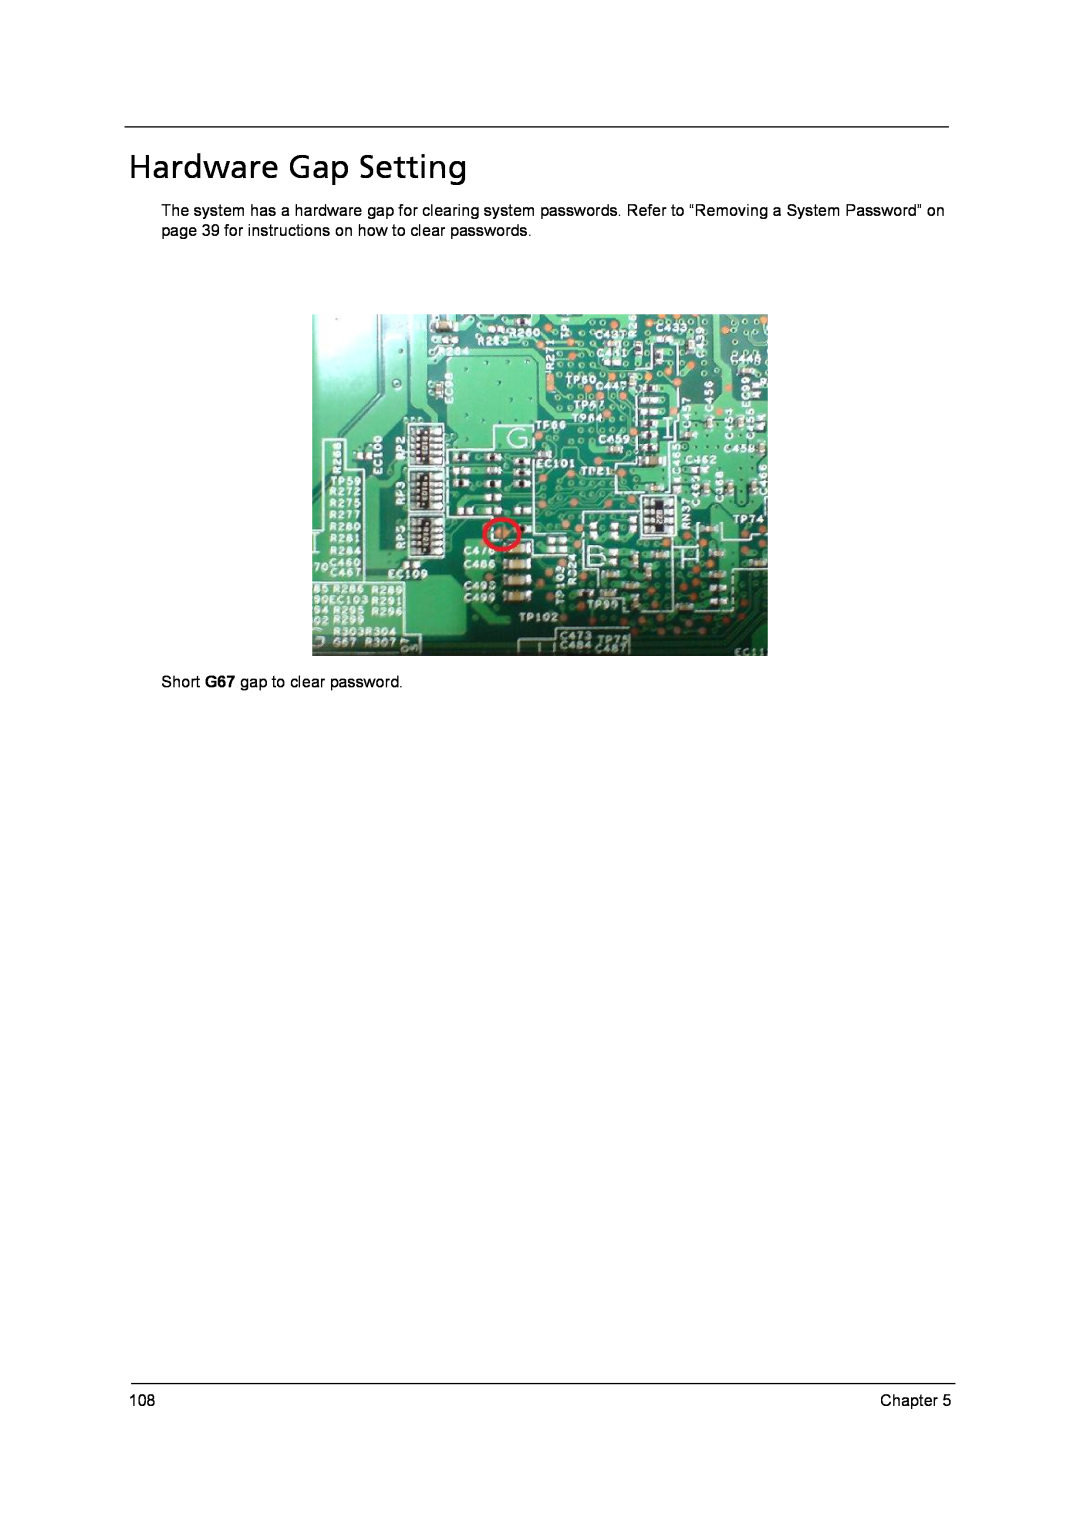 Acer 4315 manual Hardware Gap Setting, Short G67 gap to clear password, Chapter 